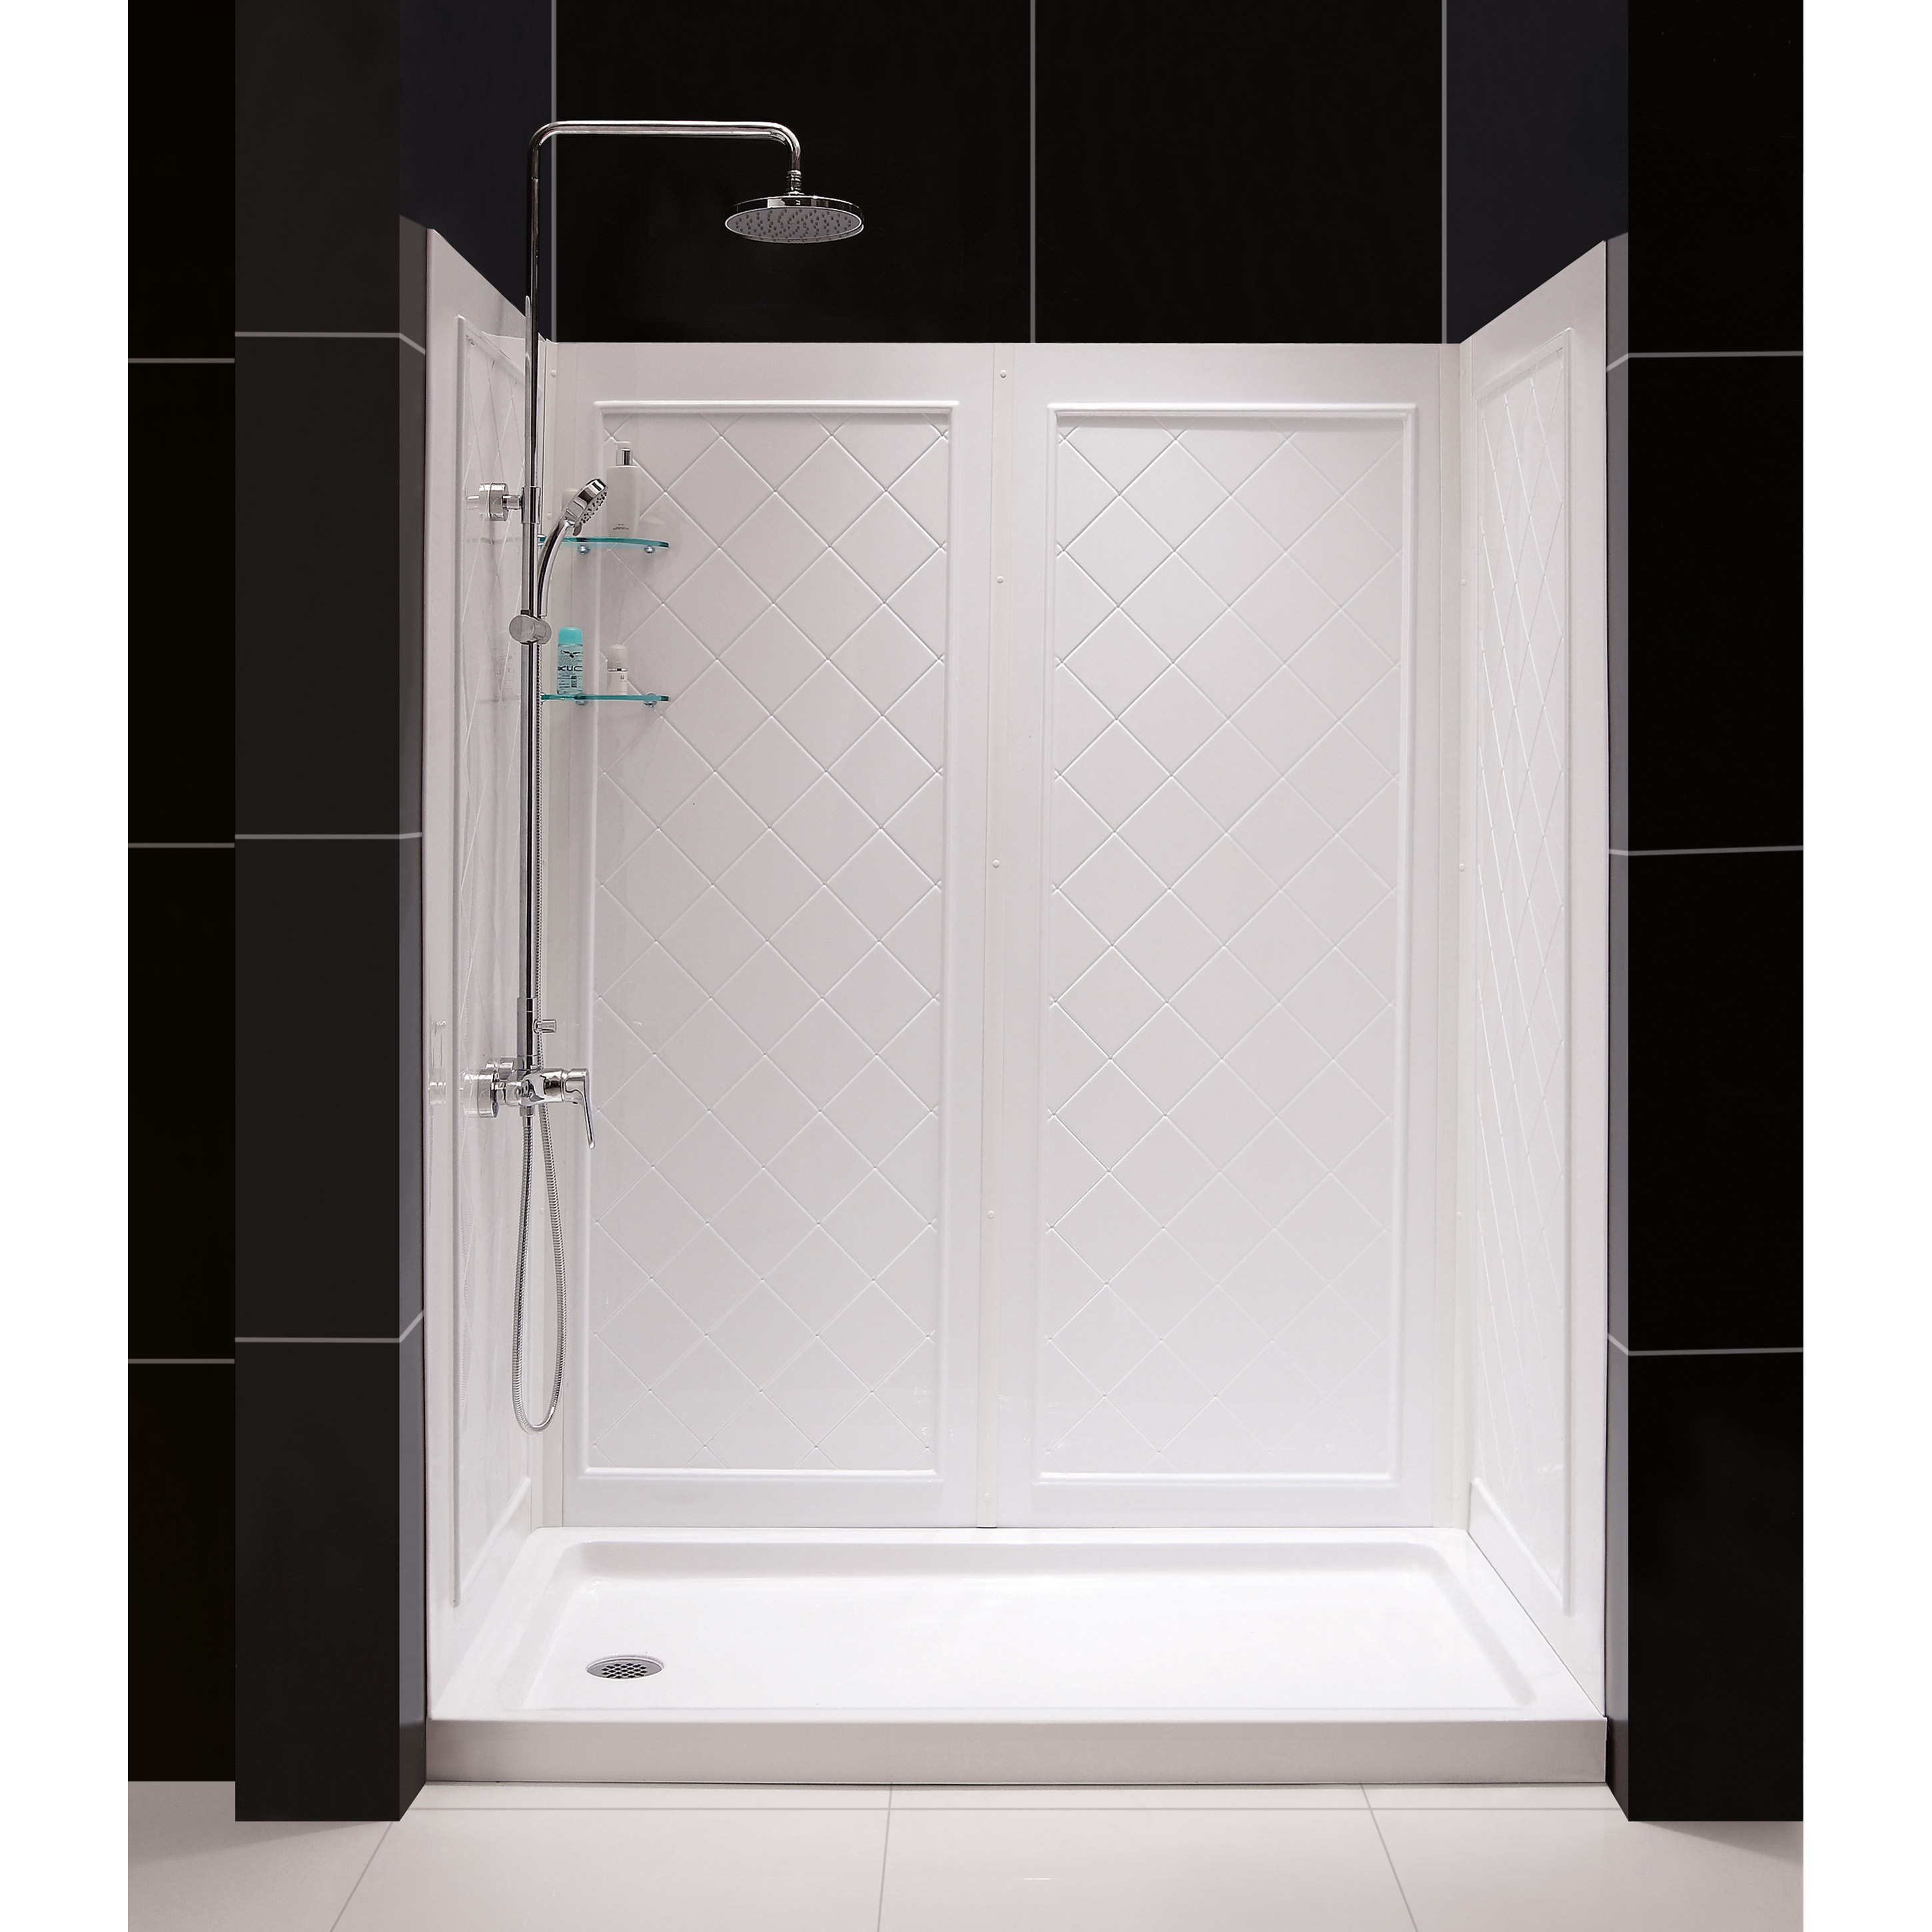 Shower Walls, Bases & Accessories For Shower Remodeling